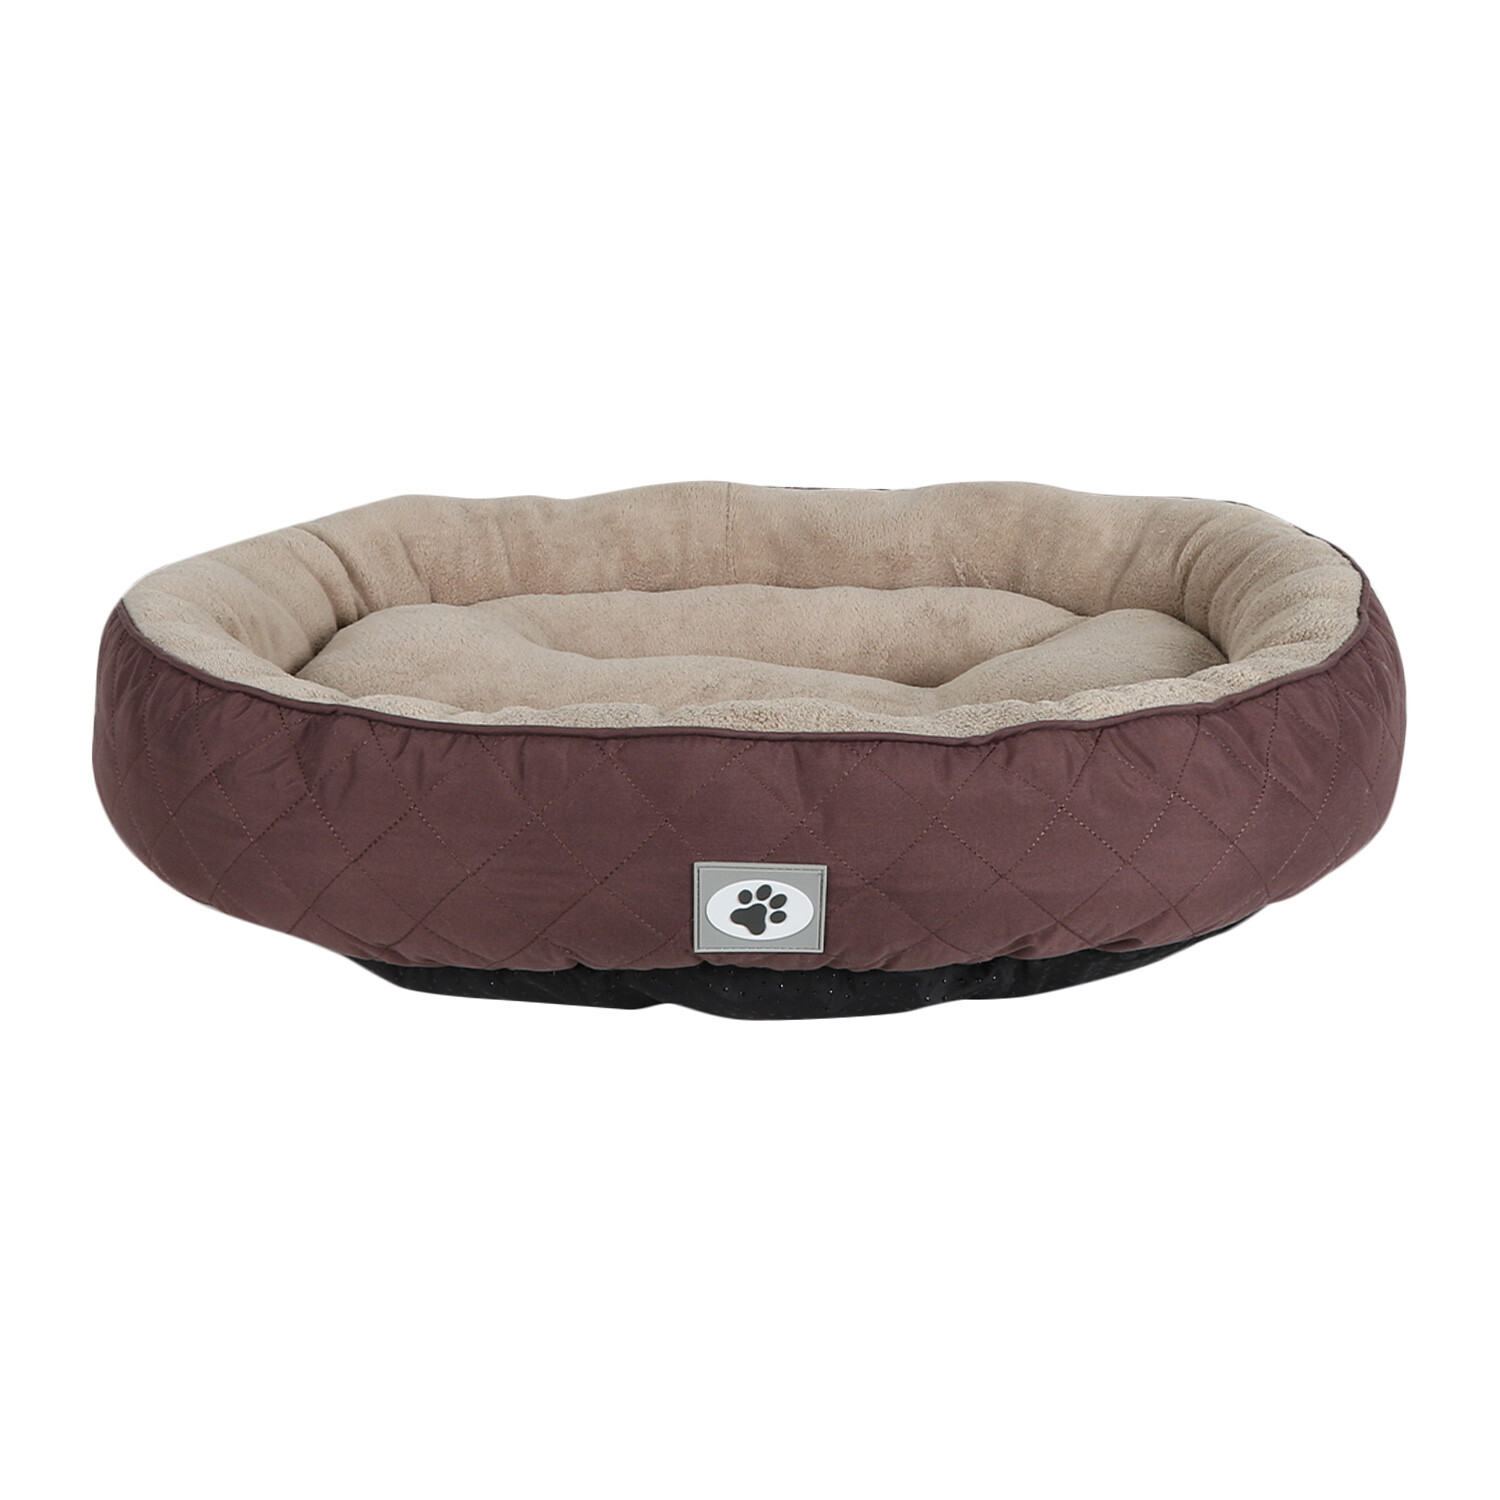 Snuggle Round Pet Bed Image 4